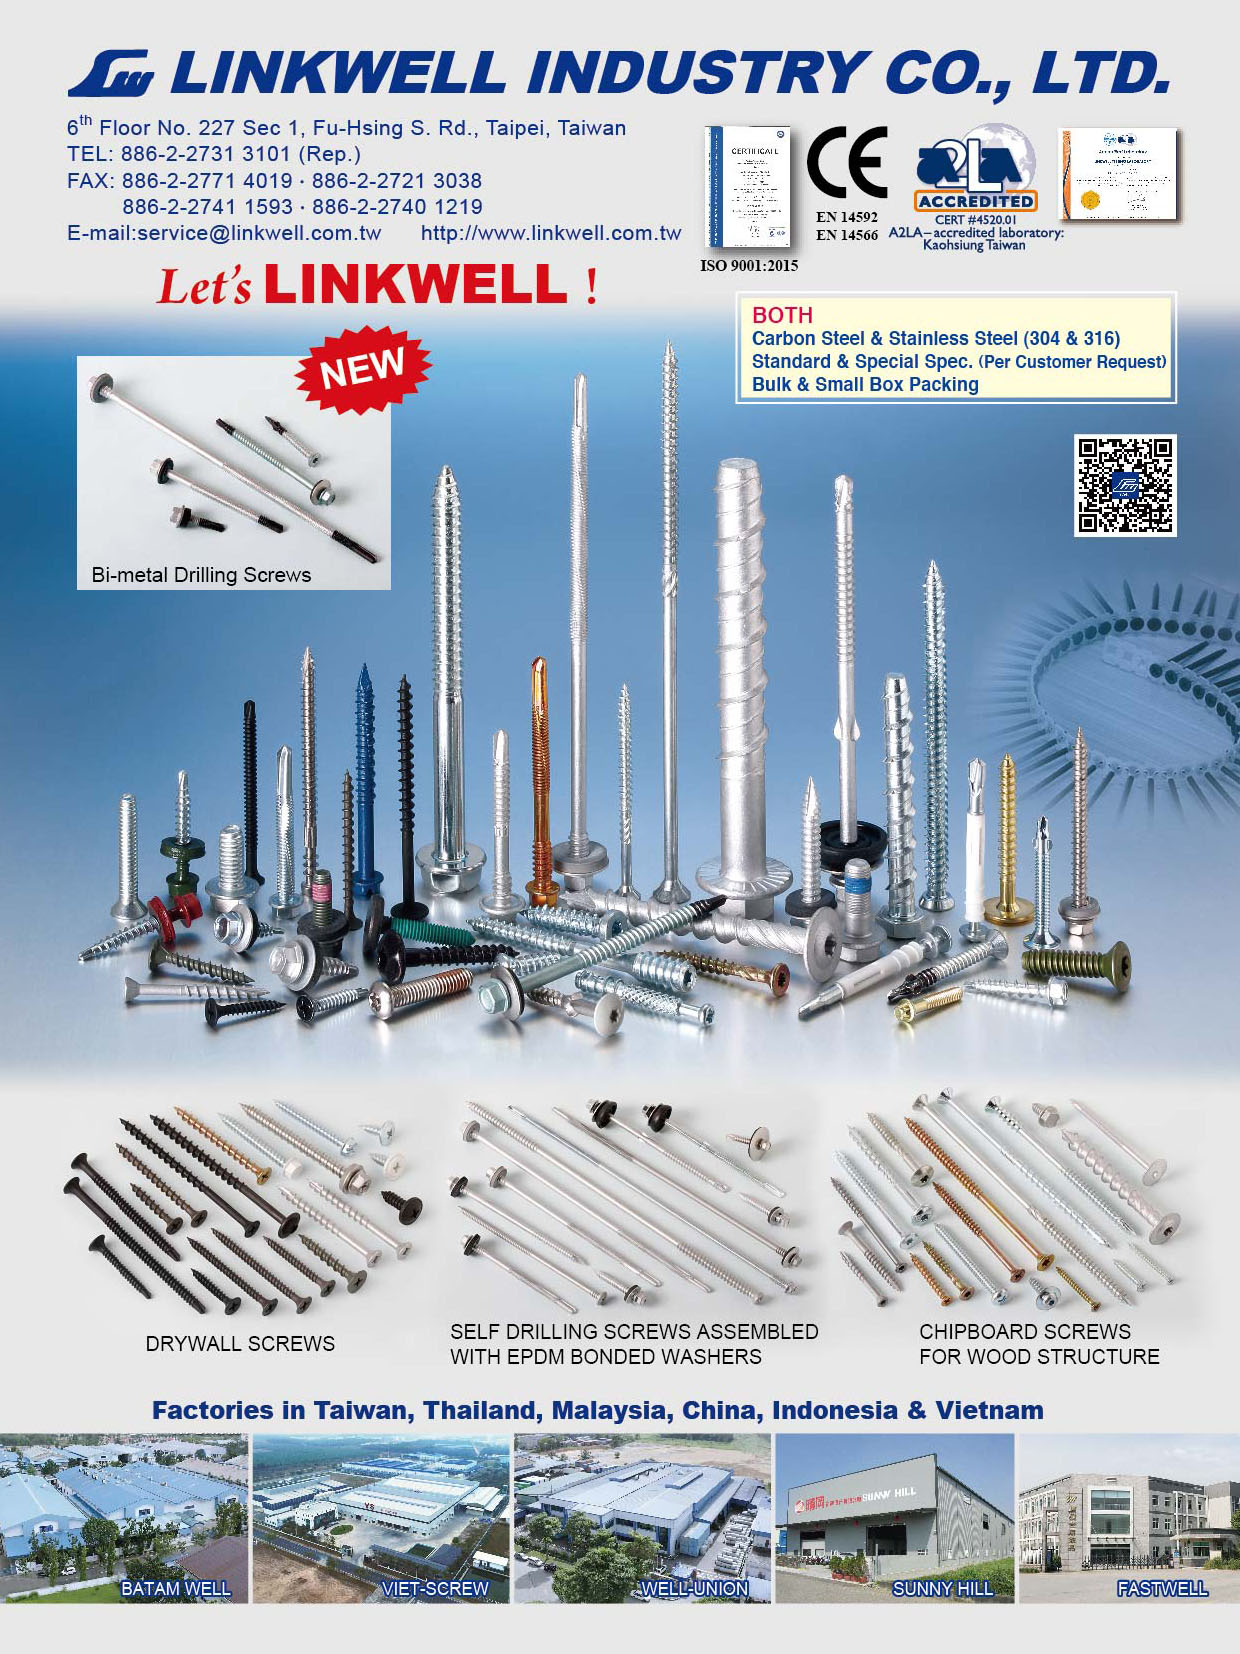 LINKWELL INDUSTRY CO., LTD. , Bi-metal Drilling Screws, Drywall Screws, Self Drilling Screws Assembled with EPDM Bonded Washers, Chipboard Screws for Wood Structure